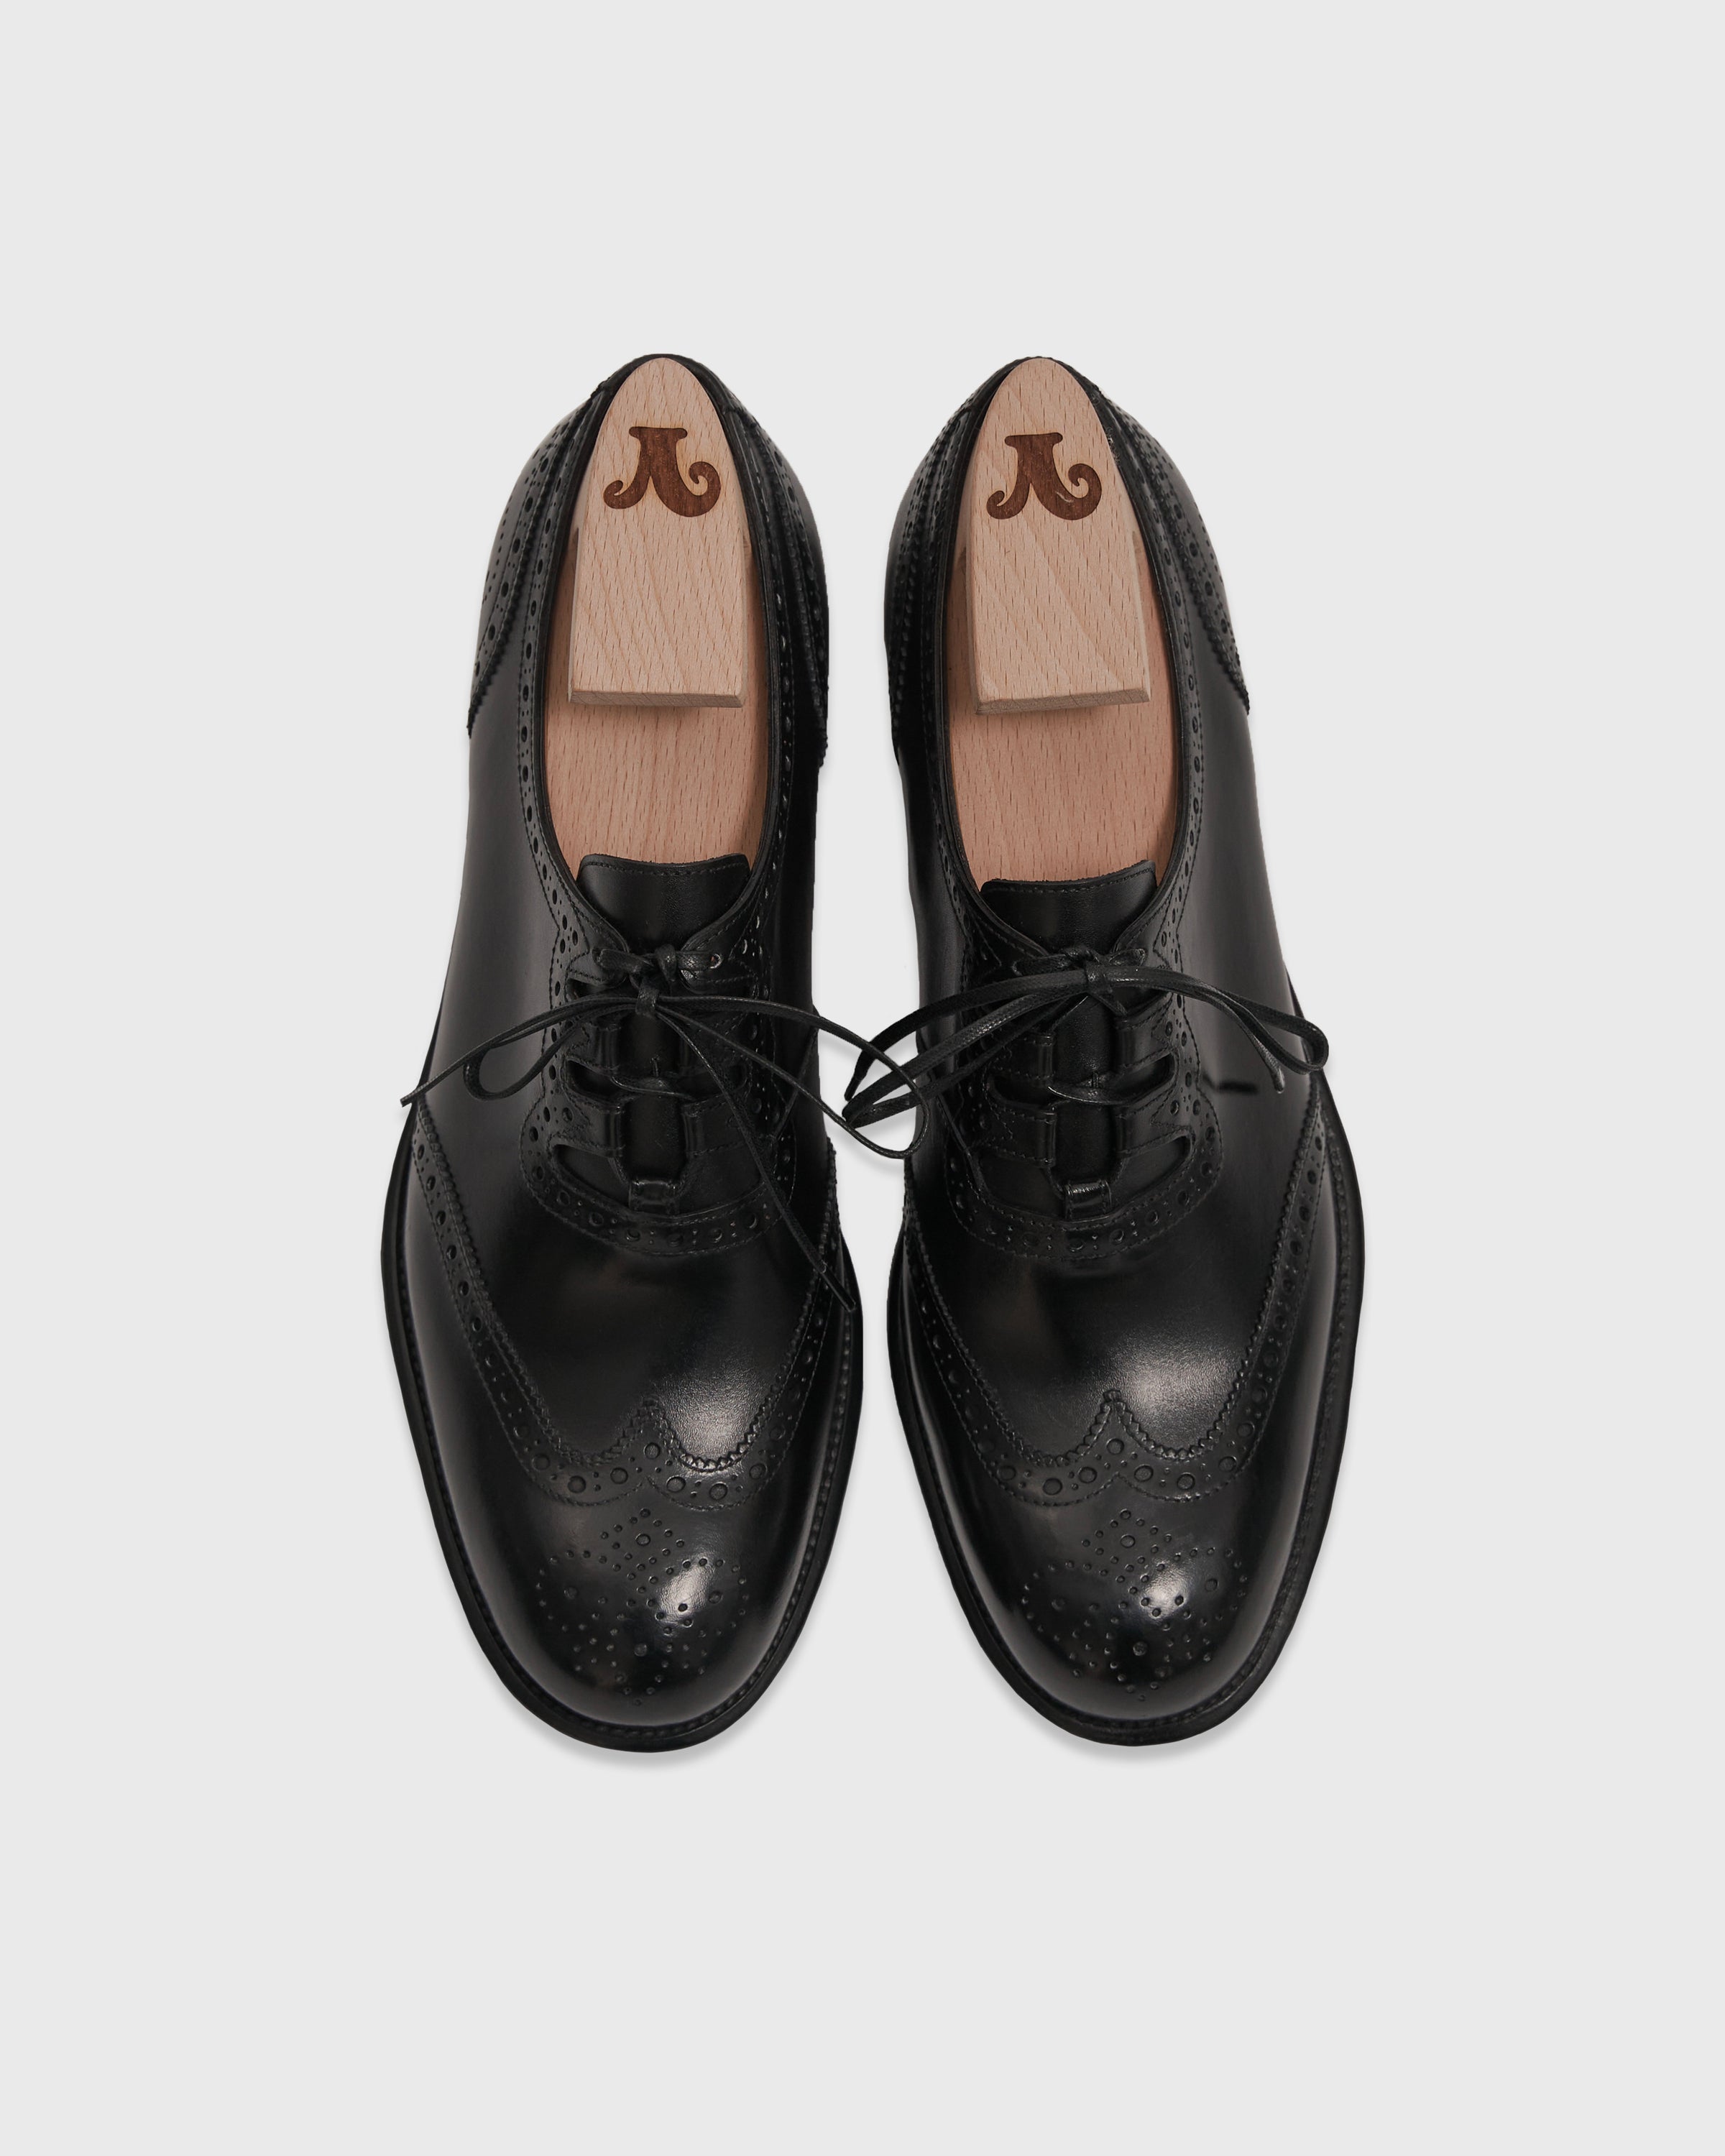 Le Yucca's Ghillie Shoes, Black – Keylime Tokyo